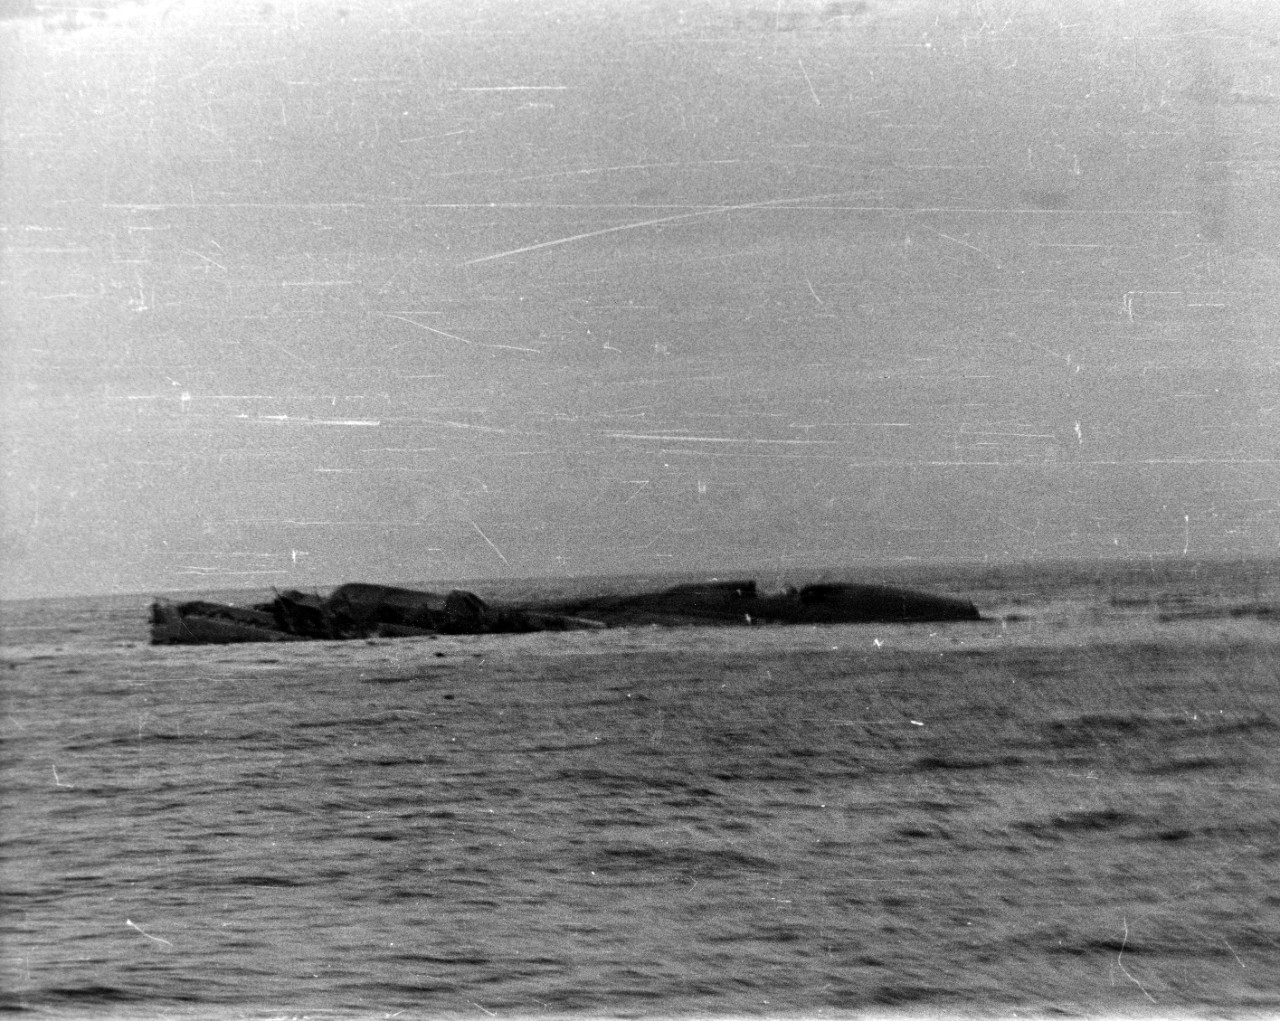 Photo #: NH 106007  Battle of Midway, June 1942